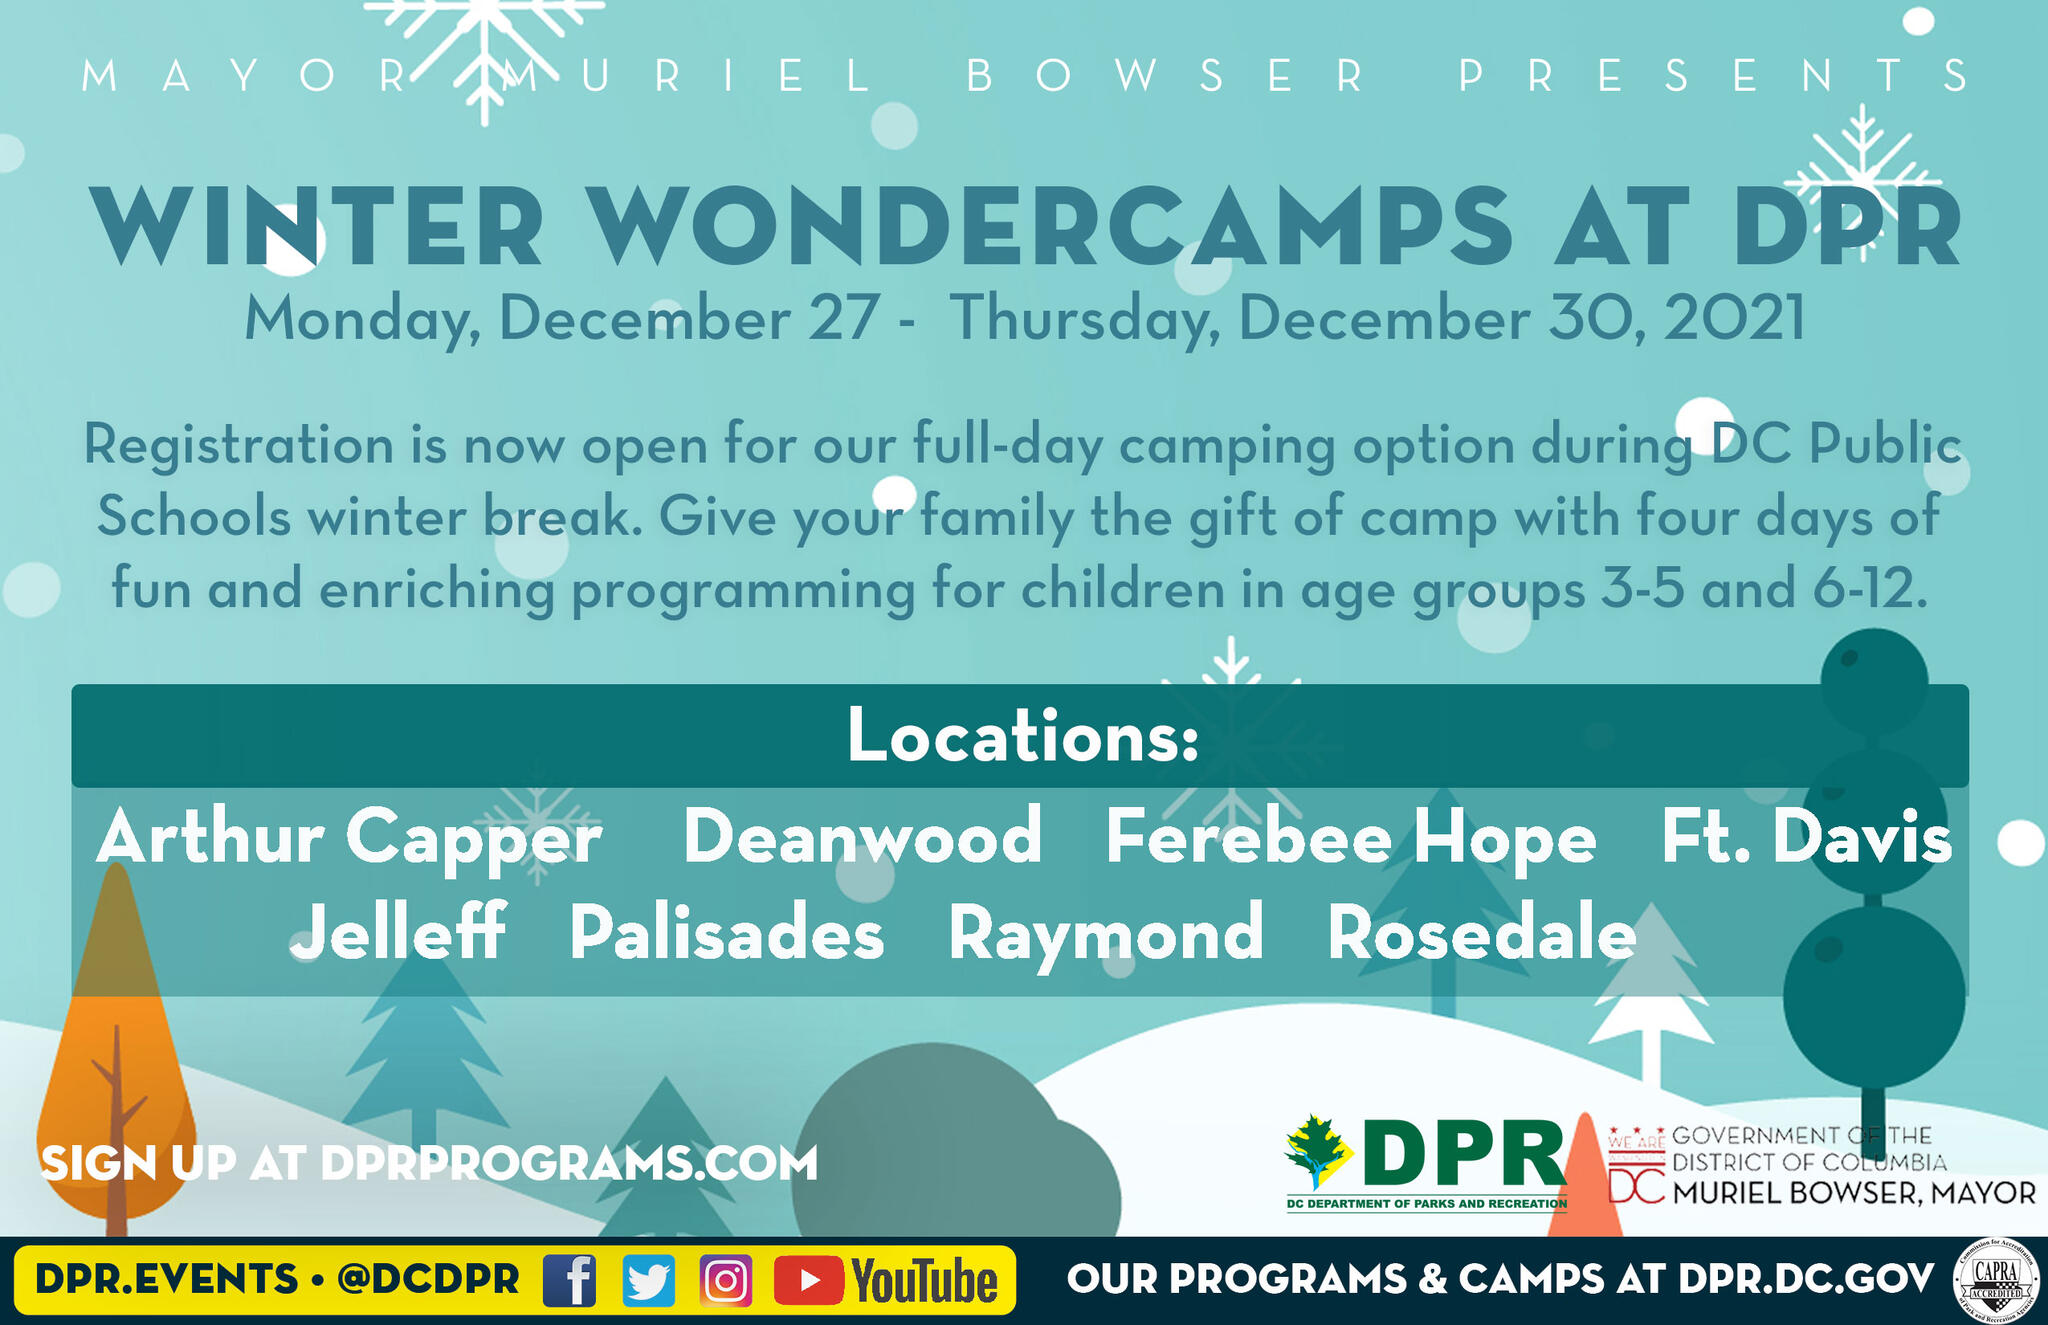 Sign Up for Winter Wondercamps at DPR 4 Days of Fun During DCPS